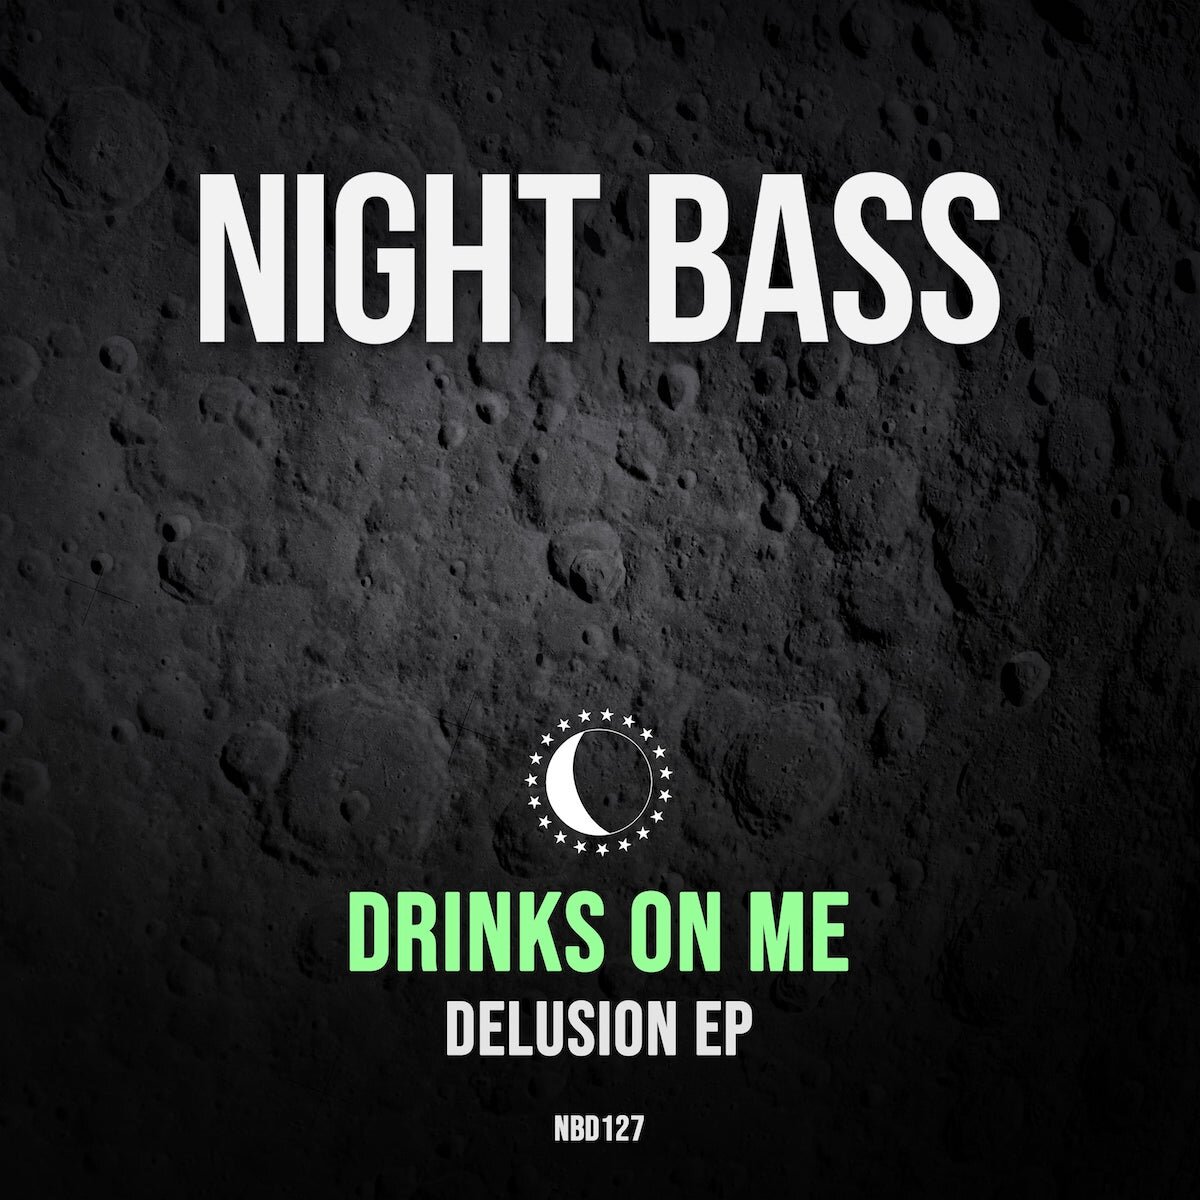 Cover-Drinks-On-Me-Delsuion-EP-Out-Now-Night-Bass-Records.jpg